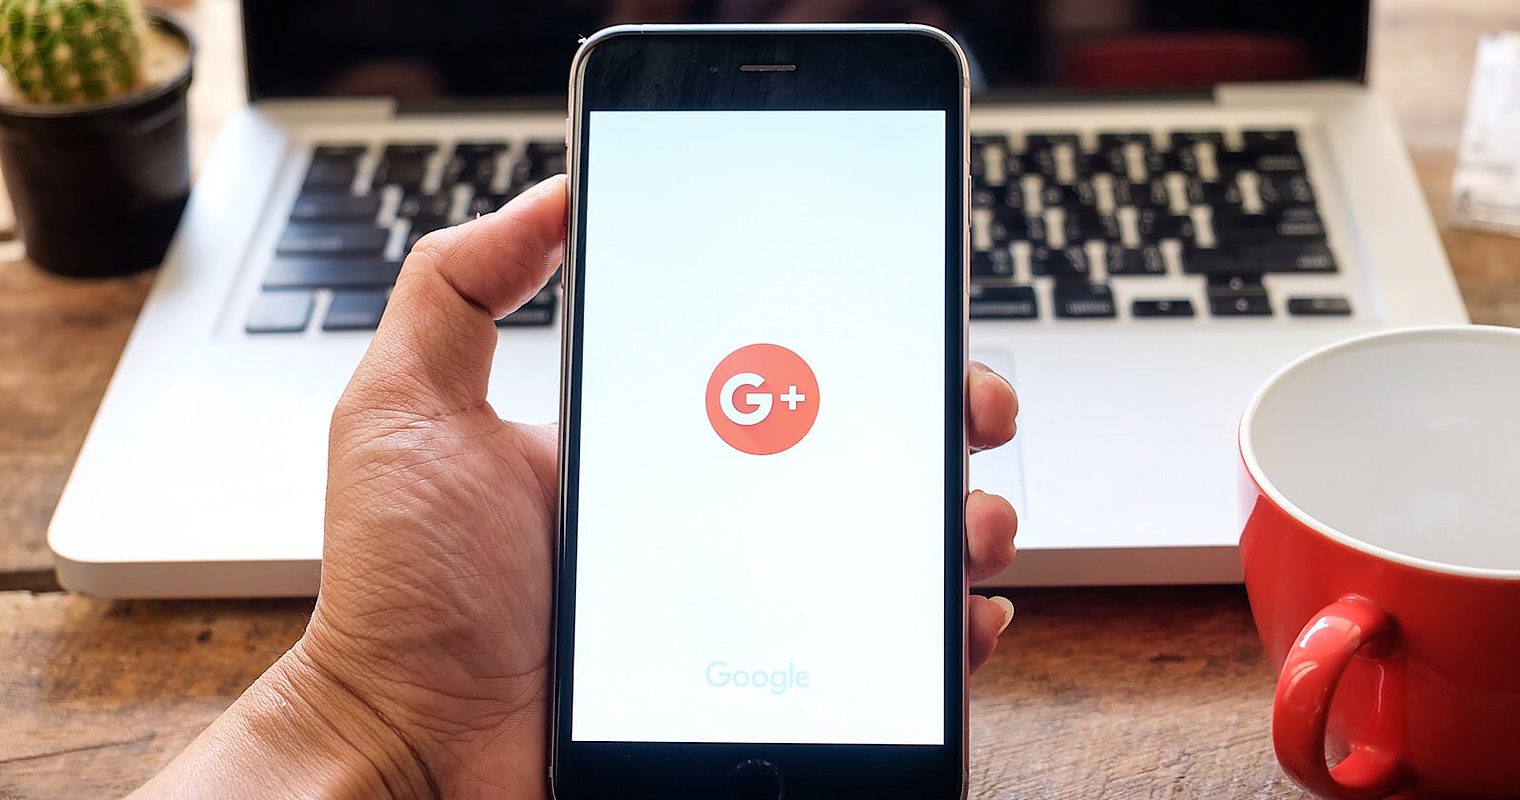 Google+ Update: Notifications for ‘Highlights’ in Communities